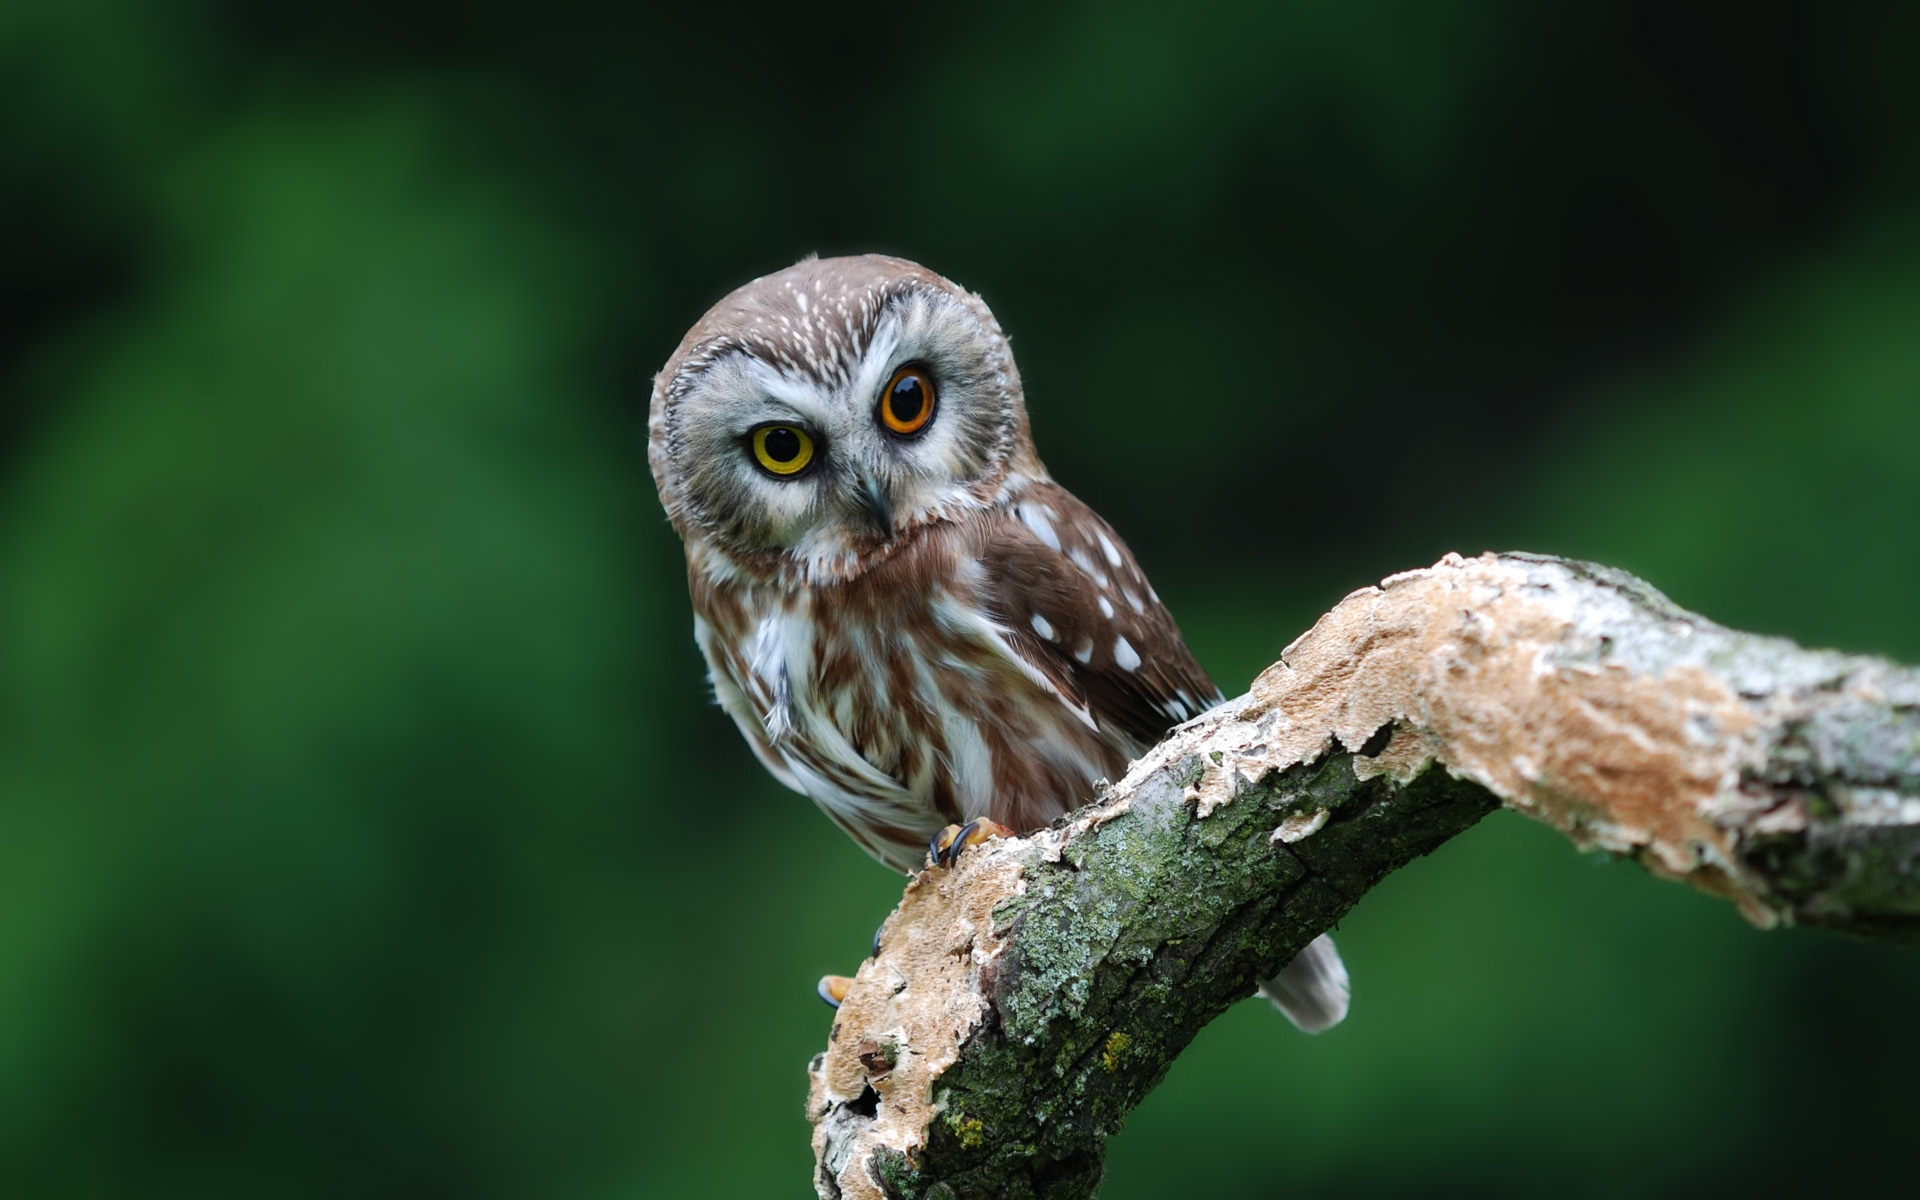 A curious little owl with colored eyes sits in a tree